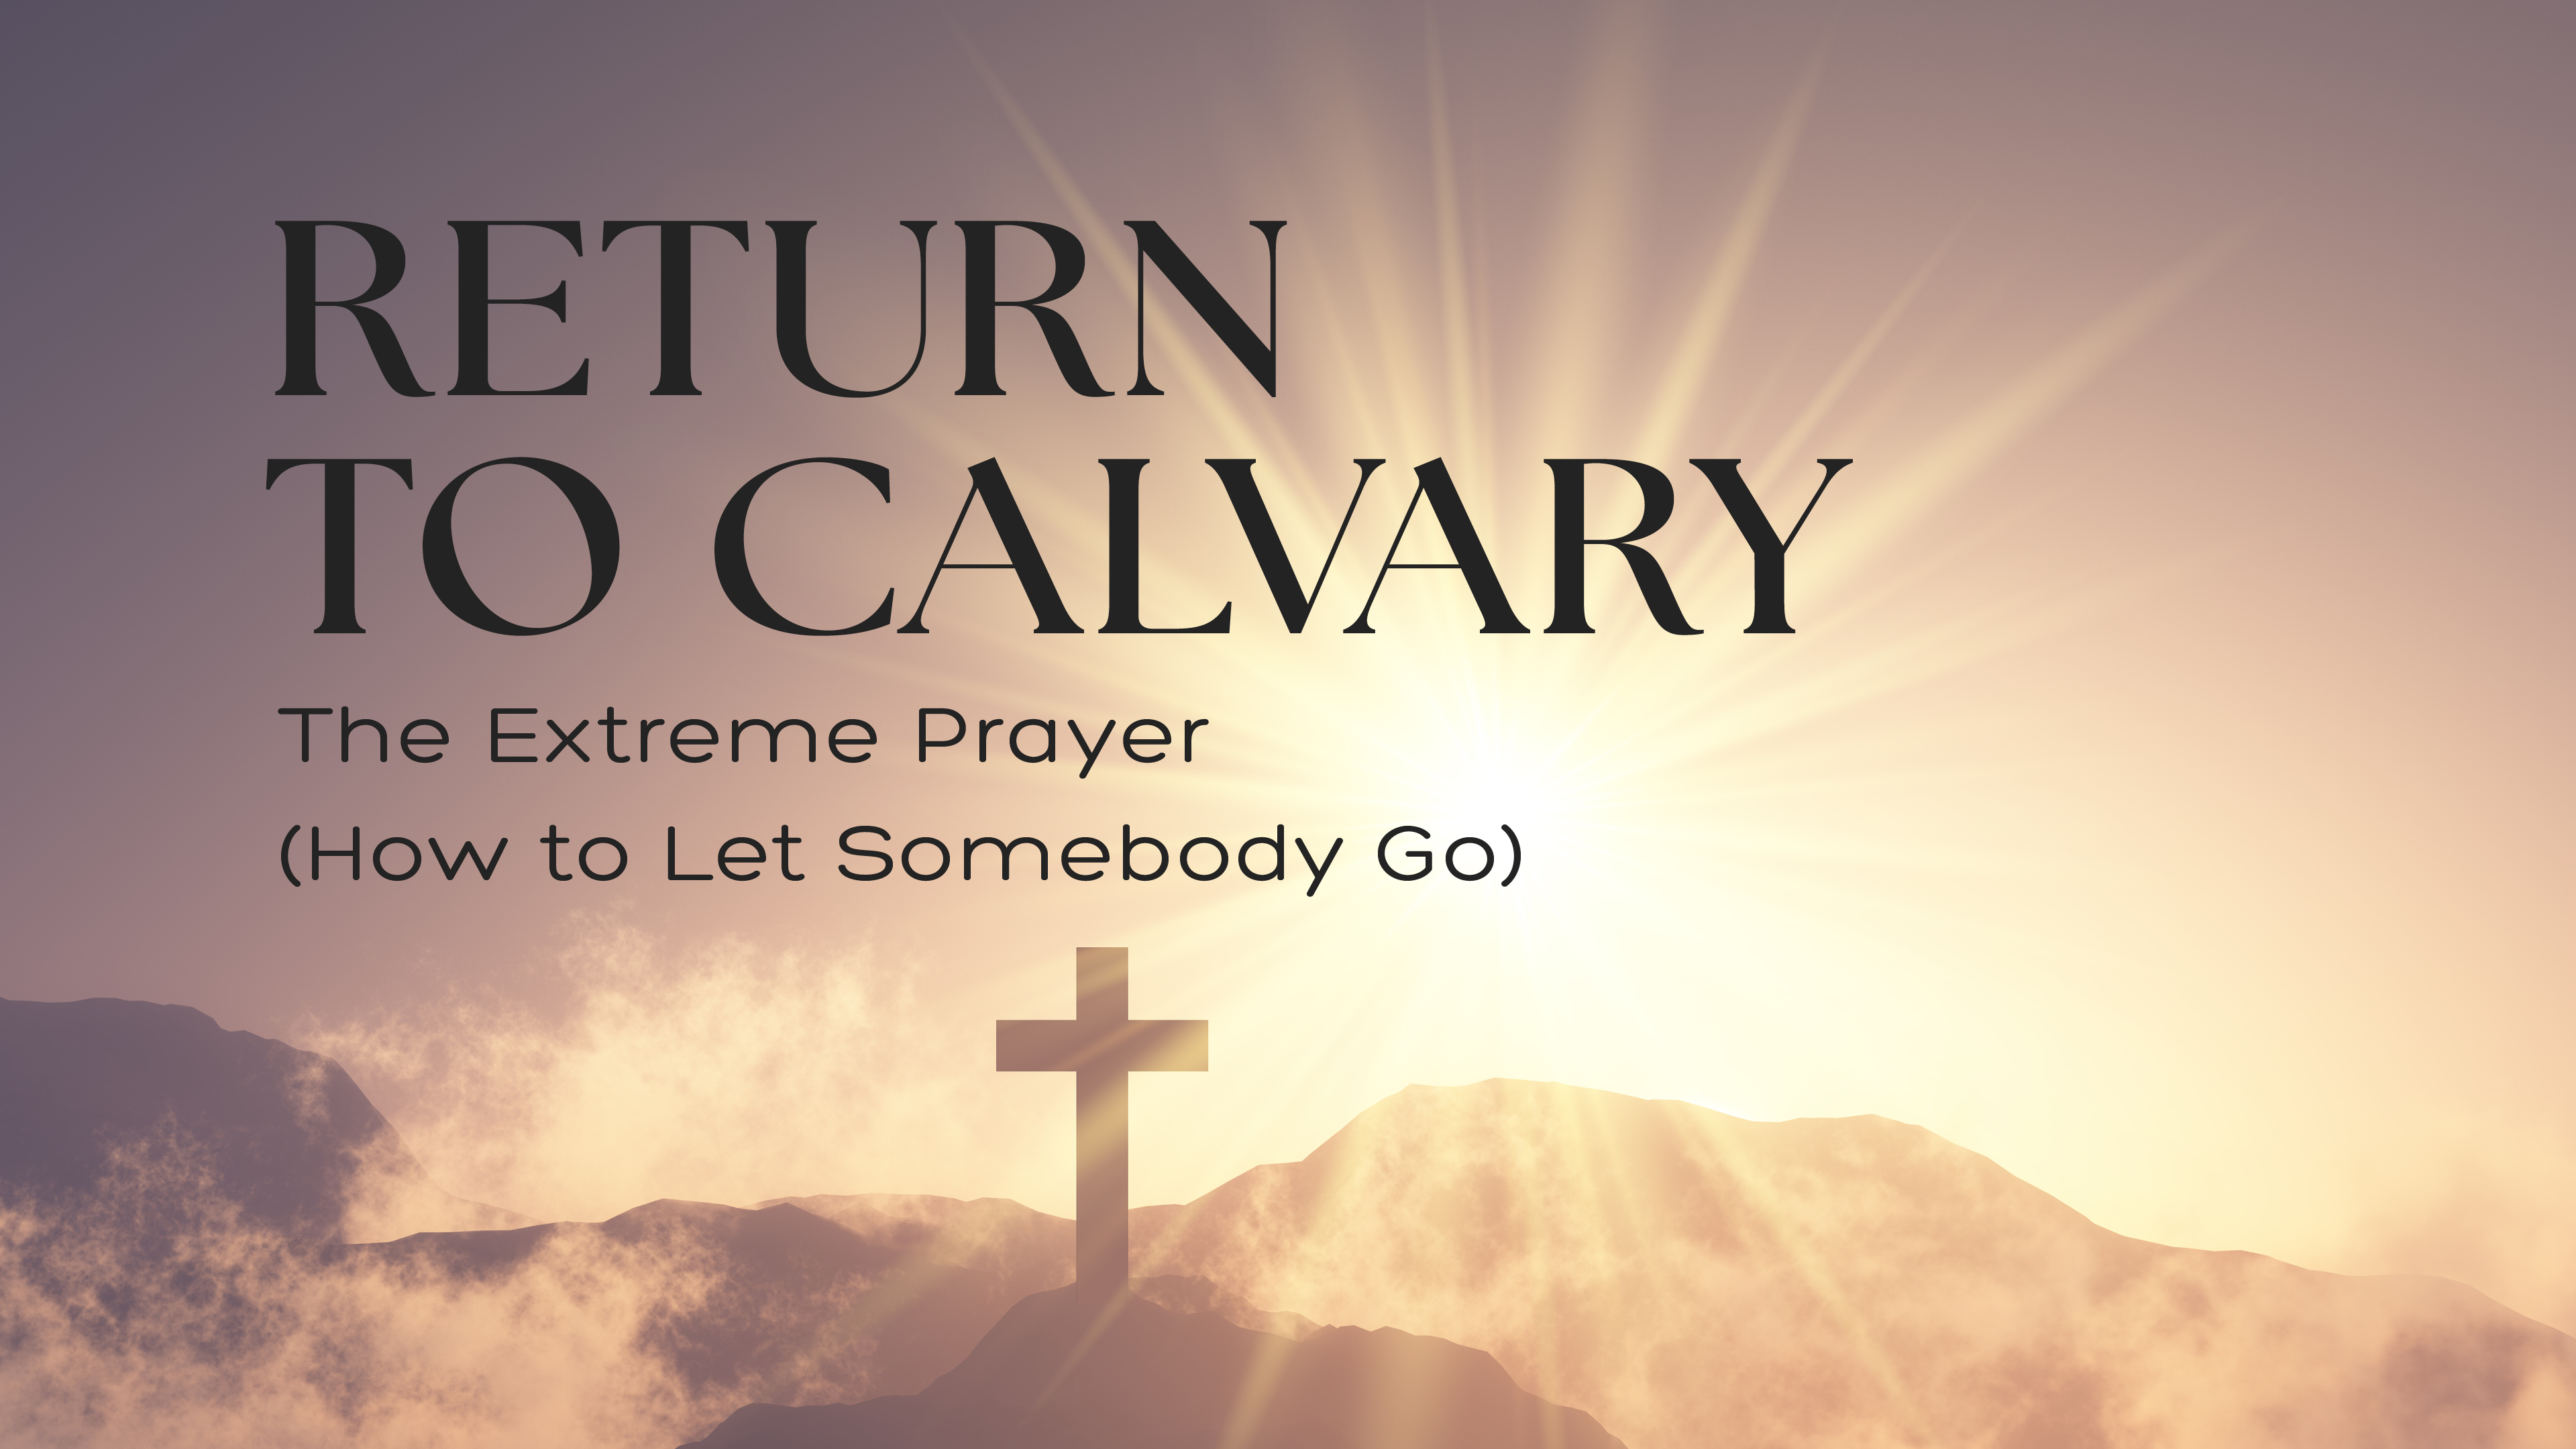 The Extreme Prayer (How to Let Somebody Go)